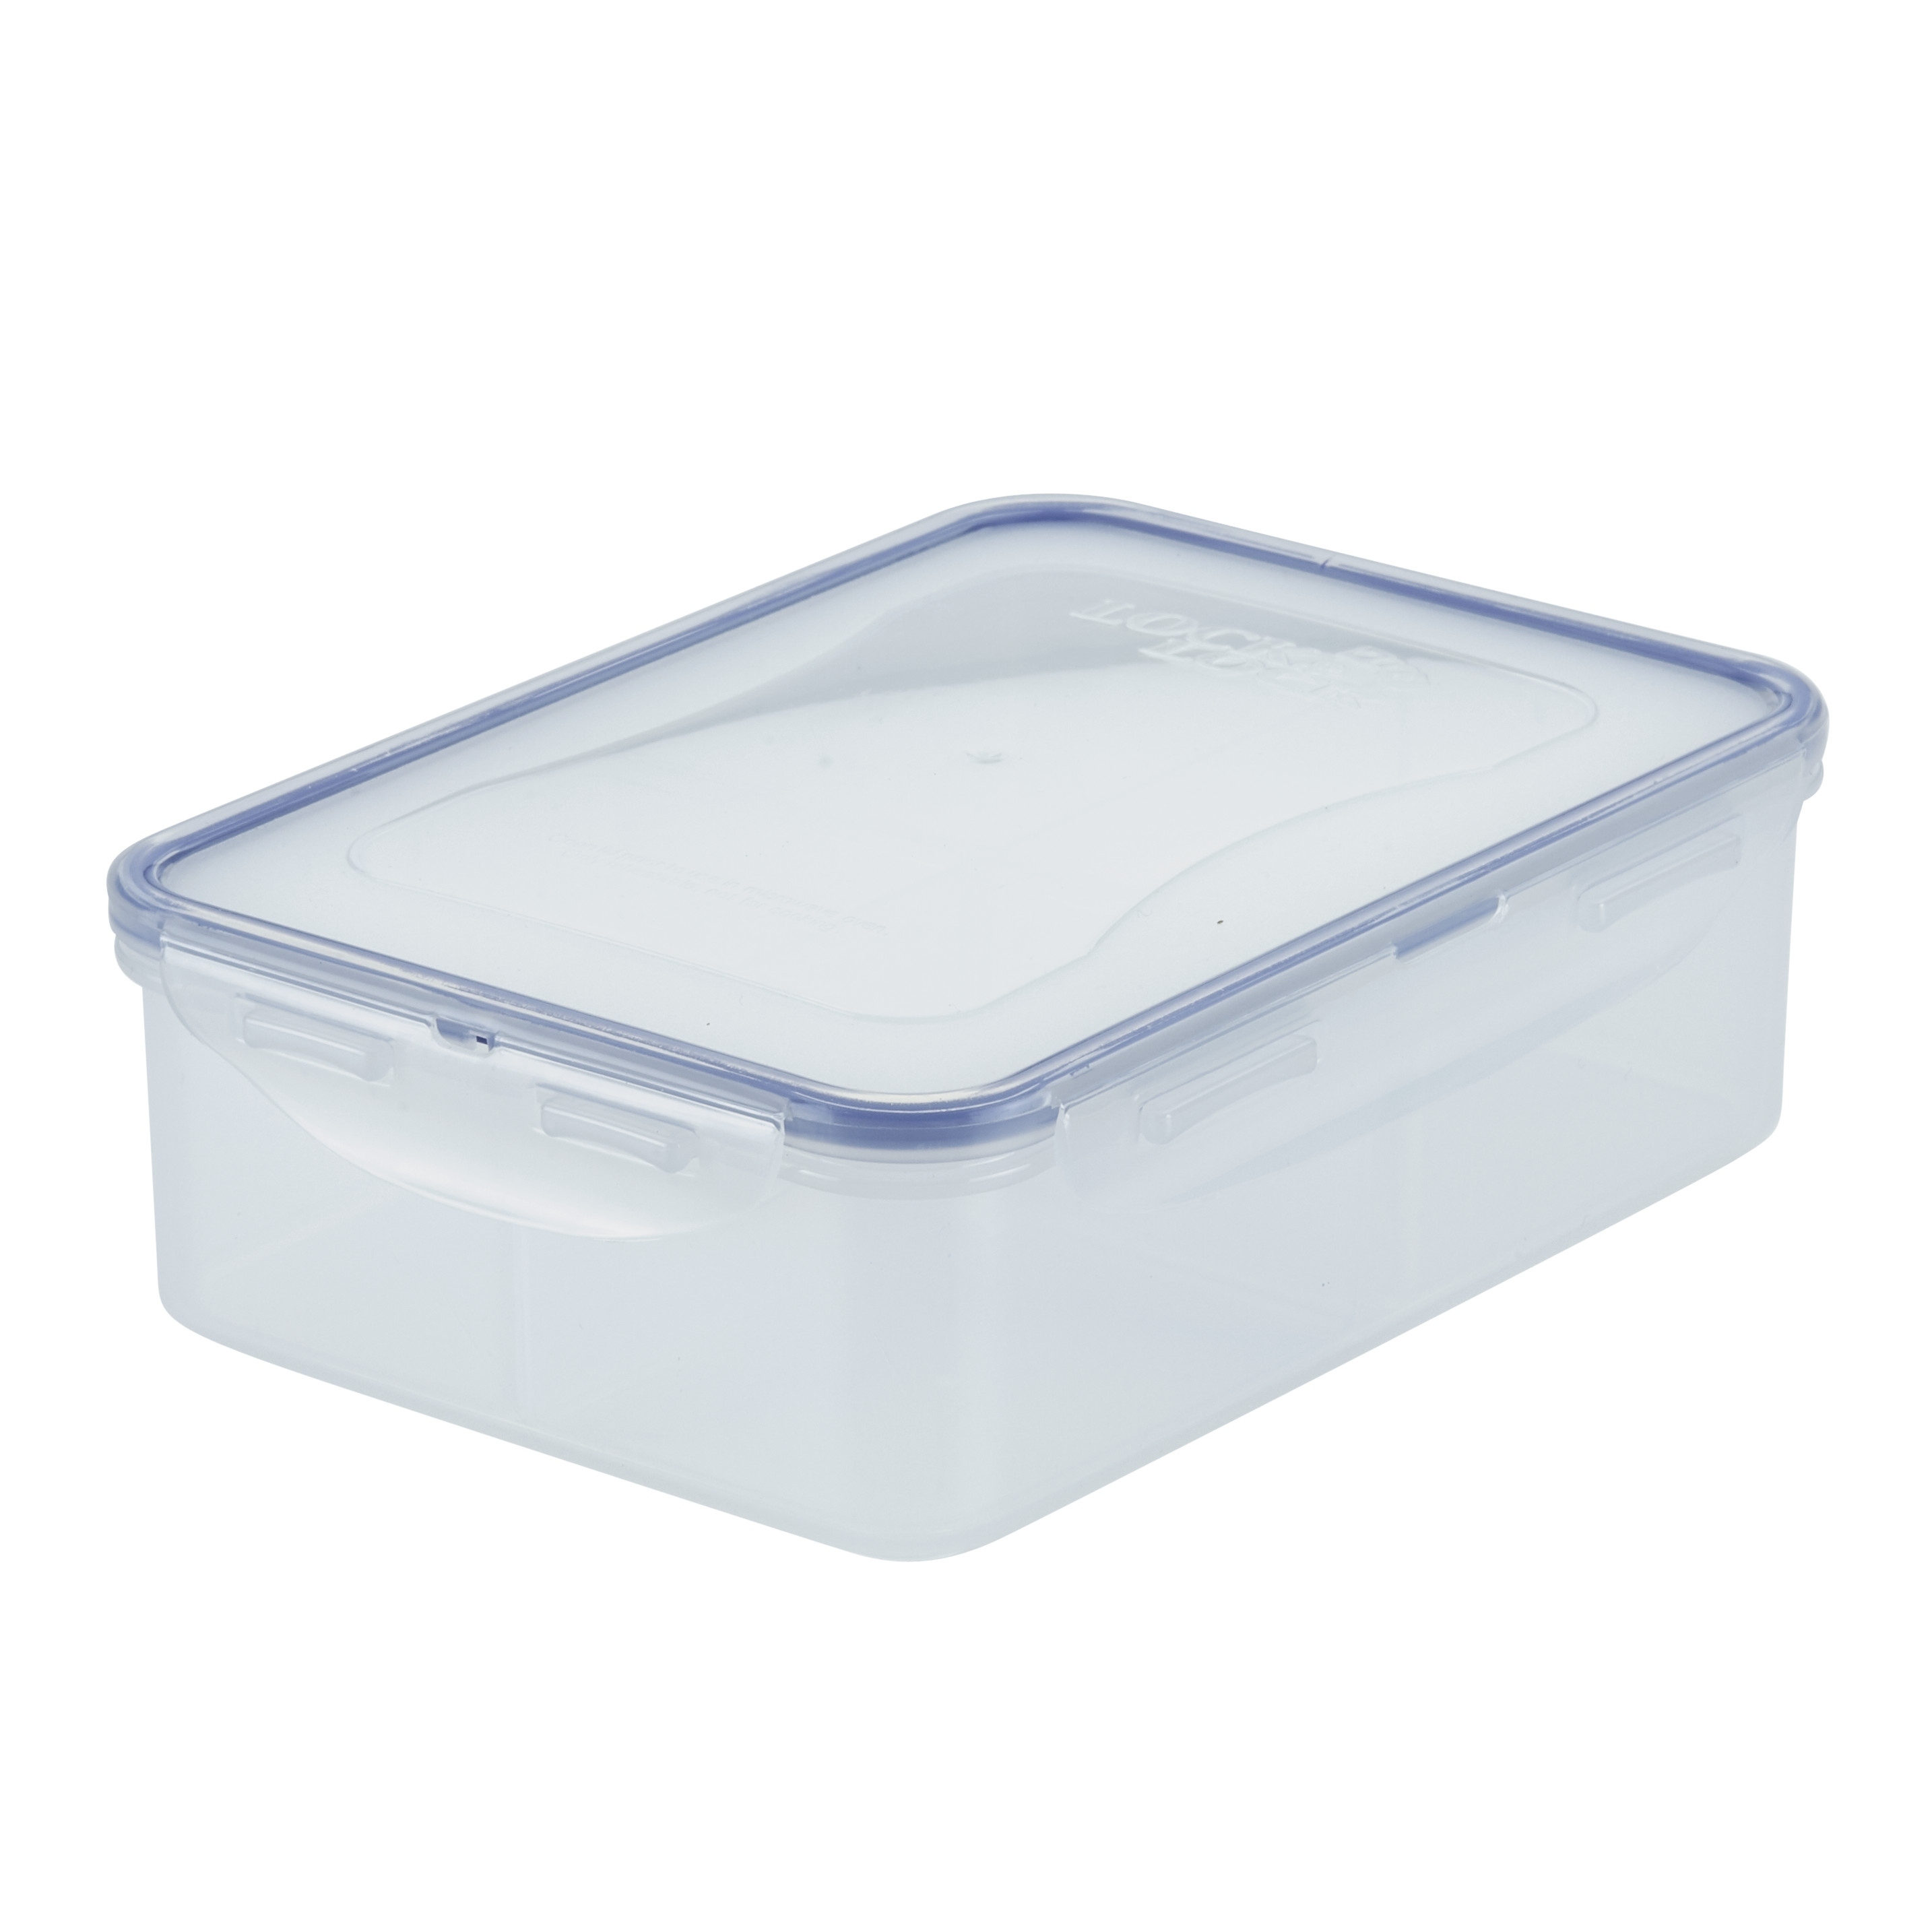 https://ak1.ostkcdn.com/images/products/29013411/Easy-Essentials-Divided-Rectangular-Food-Storage-Container-54oz-9fffd3fa-a579-4d62-8761-984e2c539f61.jpg